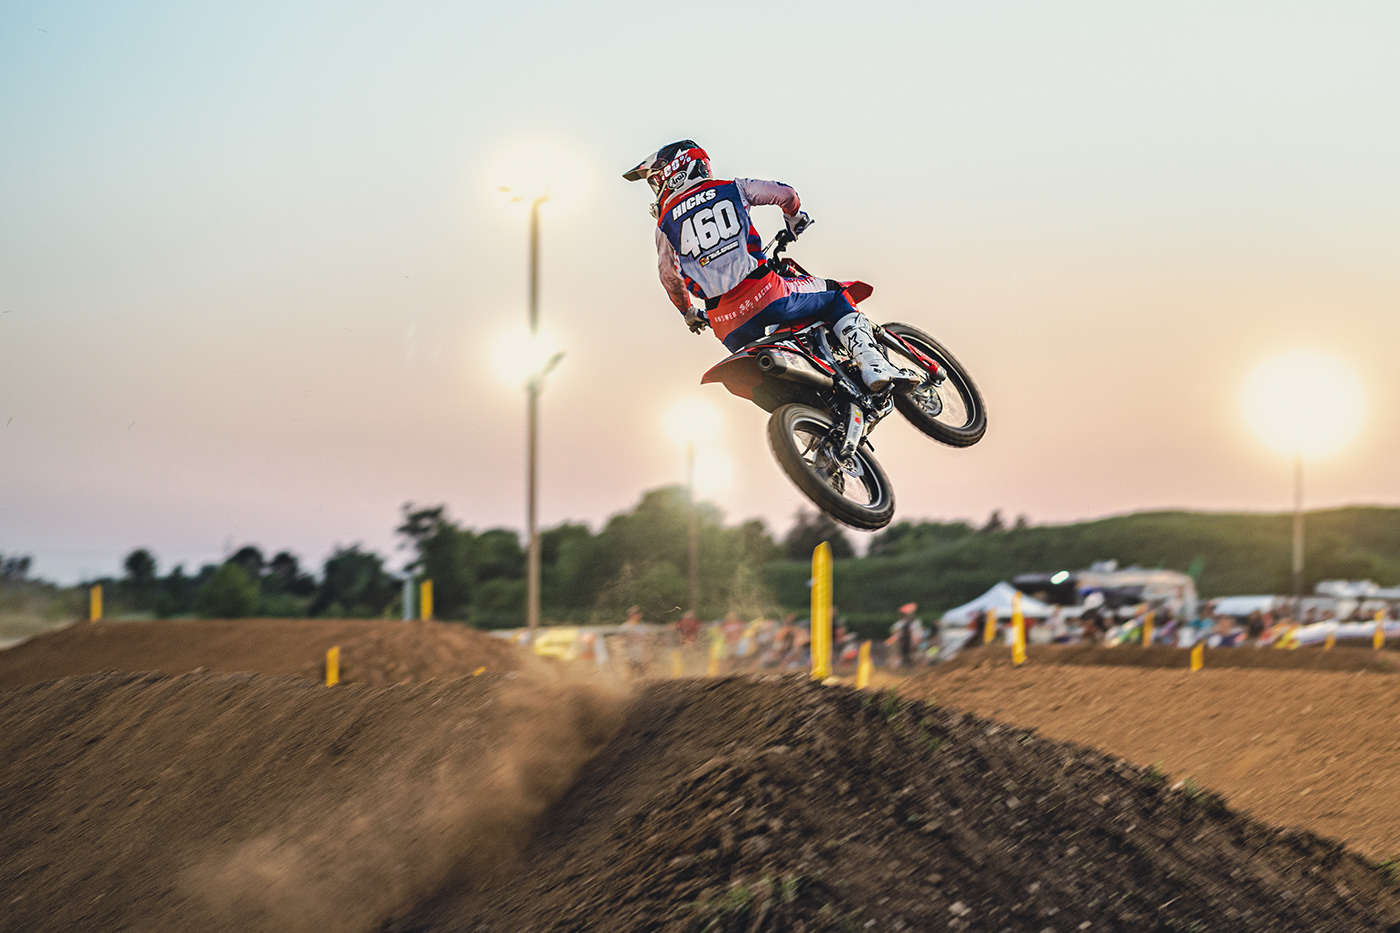 action sports dirtbike event photography Motocross motorcycle Motorsport mx Photography  Racing supercross